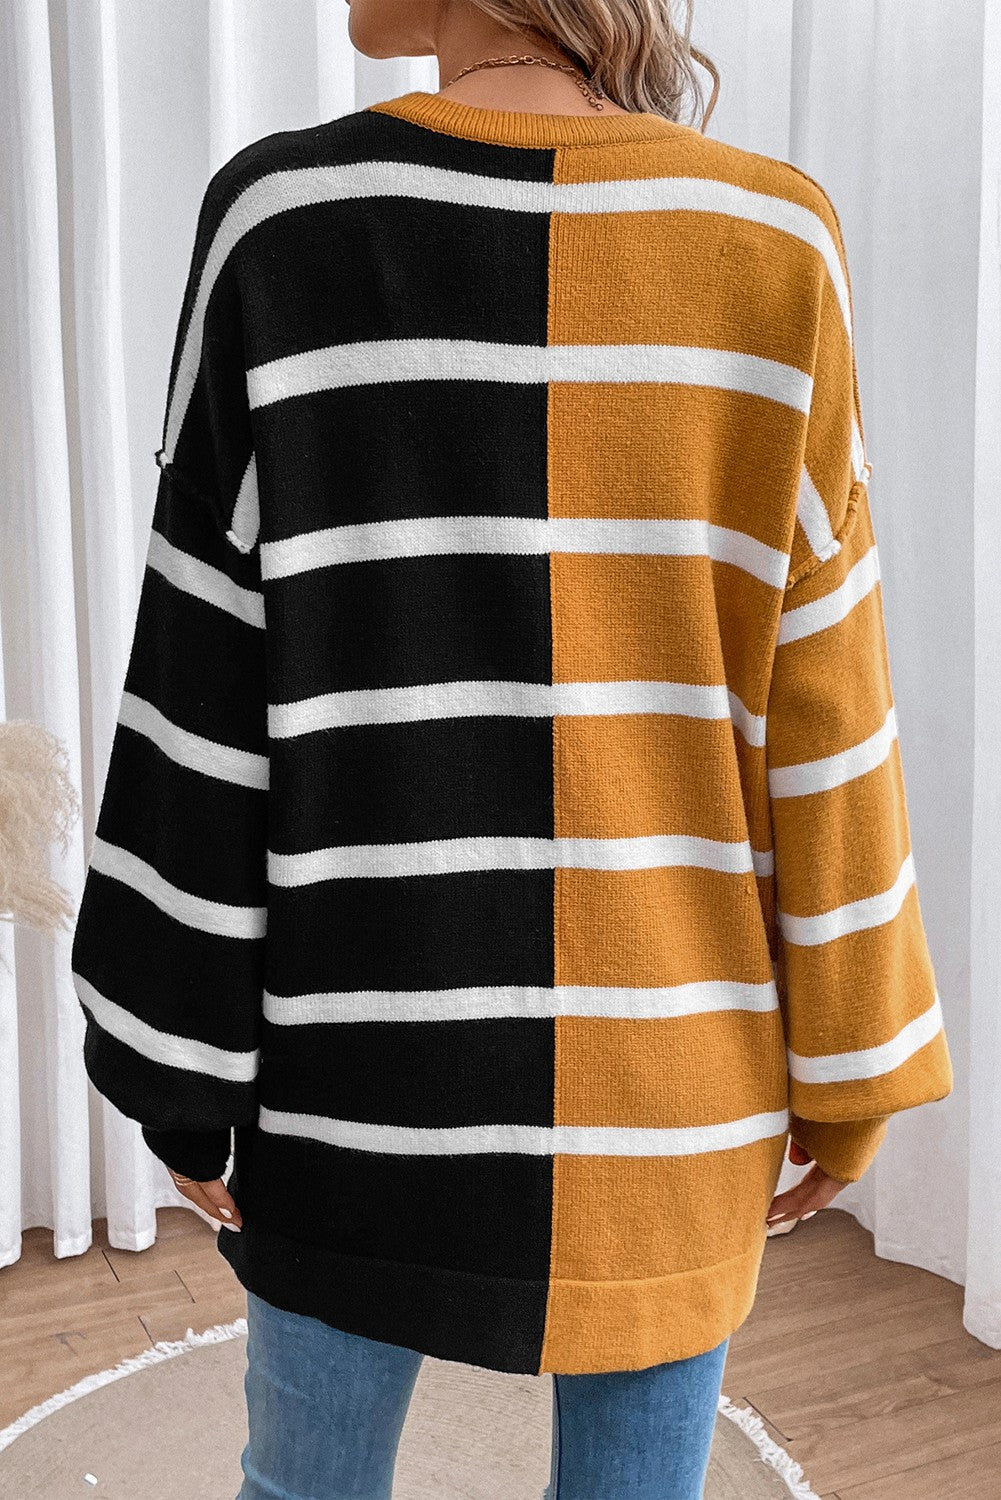 Striped Sophistication: Oversized Two-Toned Dropped Shoulder Sweater